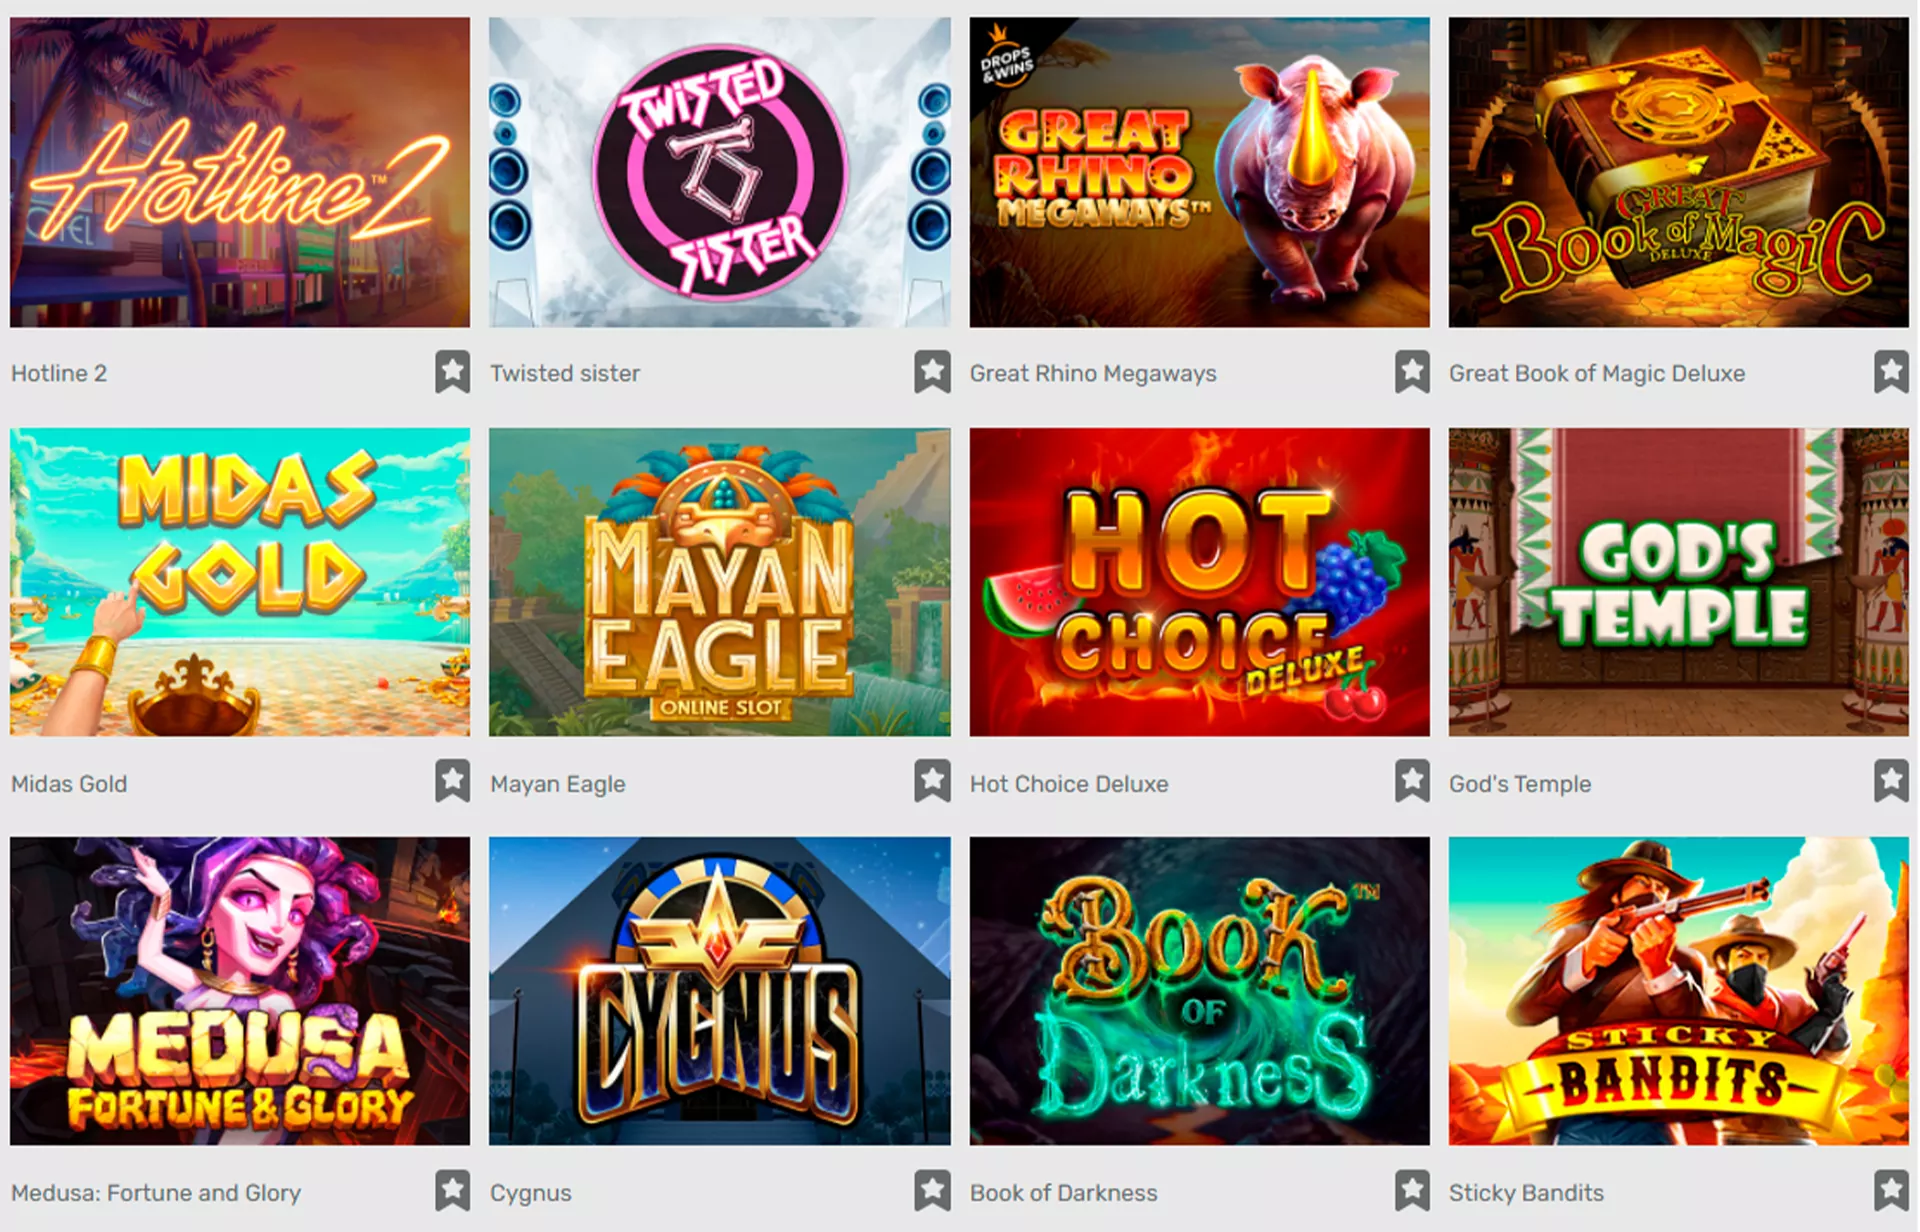 Go to the 'Casino' sections and choos your favourite slot to play.